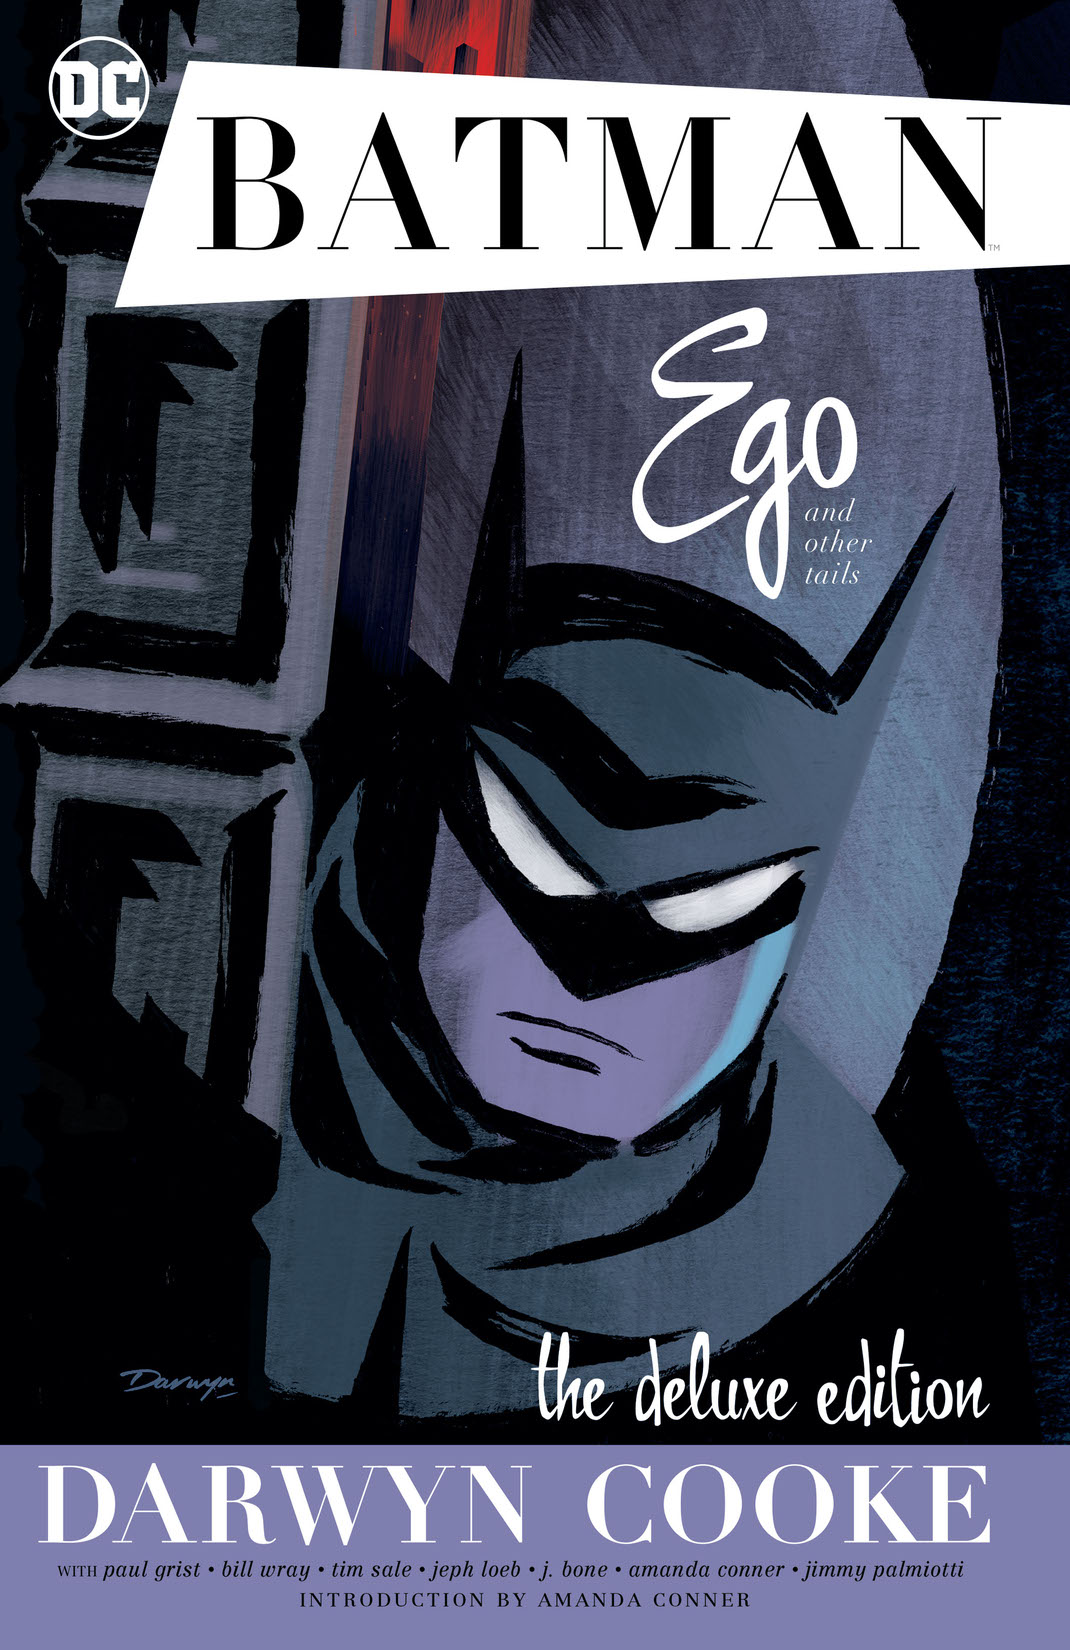 Batman: Ego and Other Tails Deluxe Edition preview images